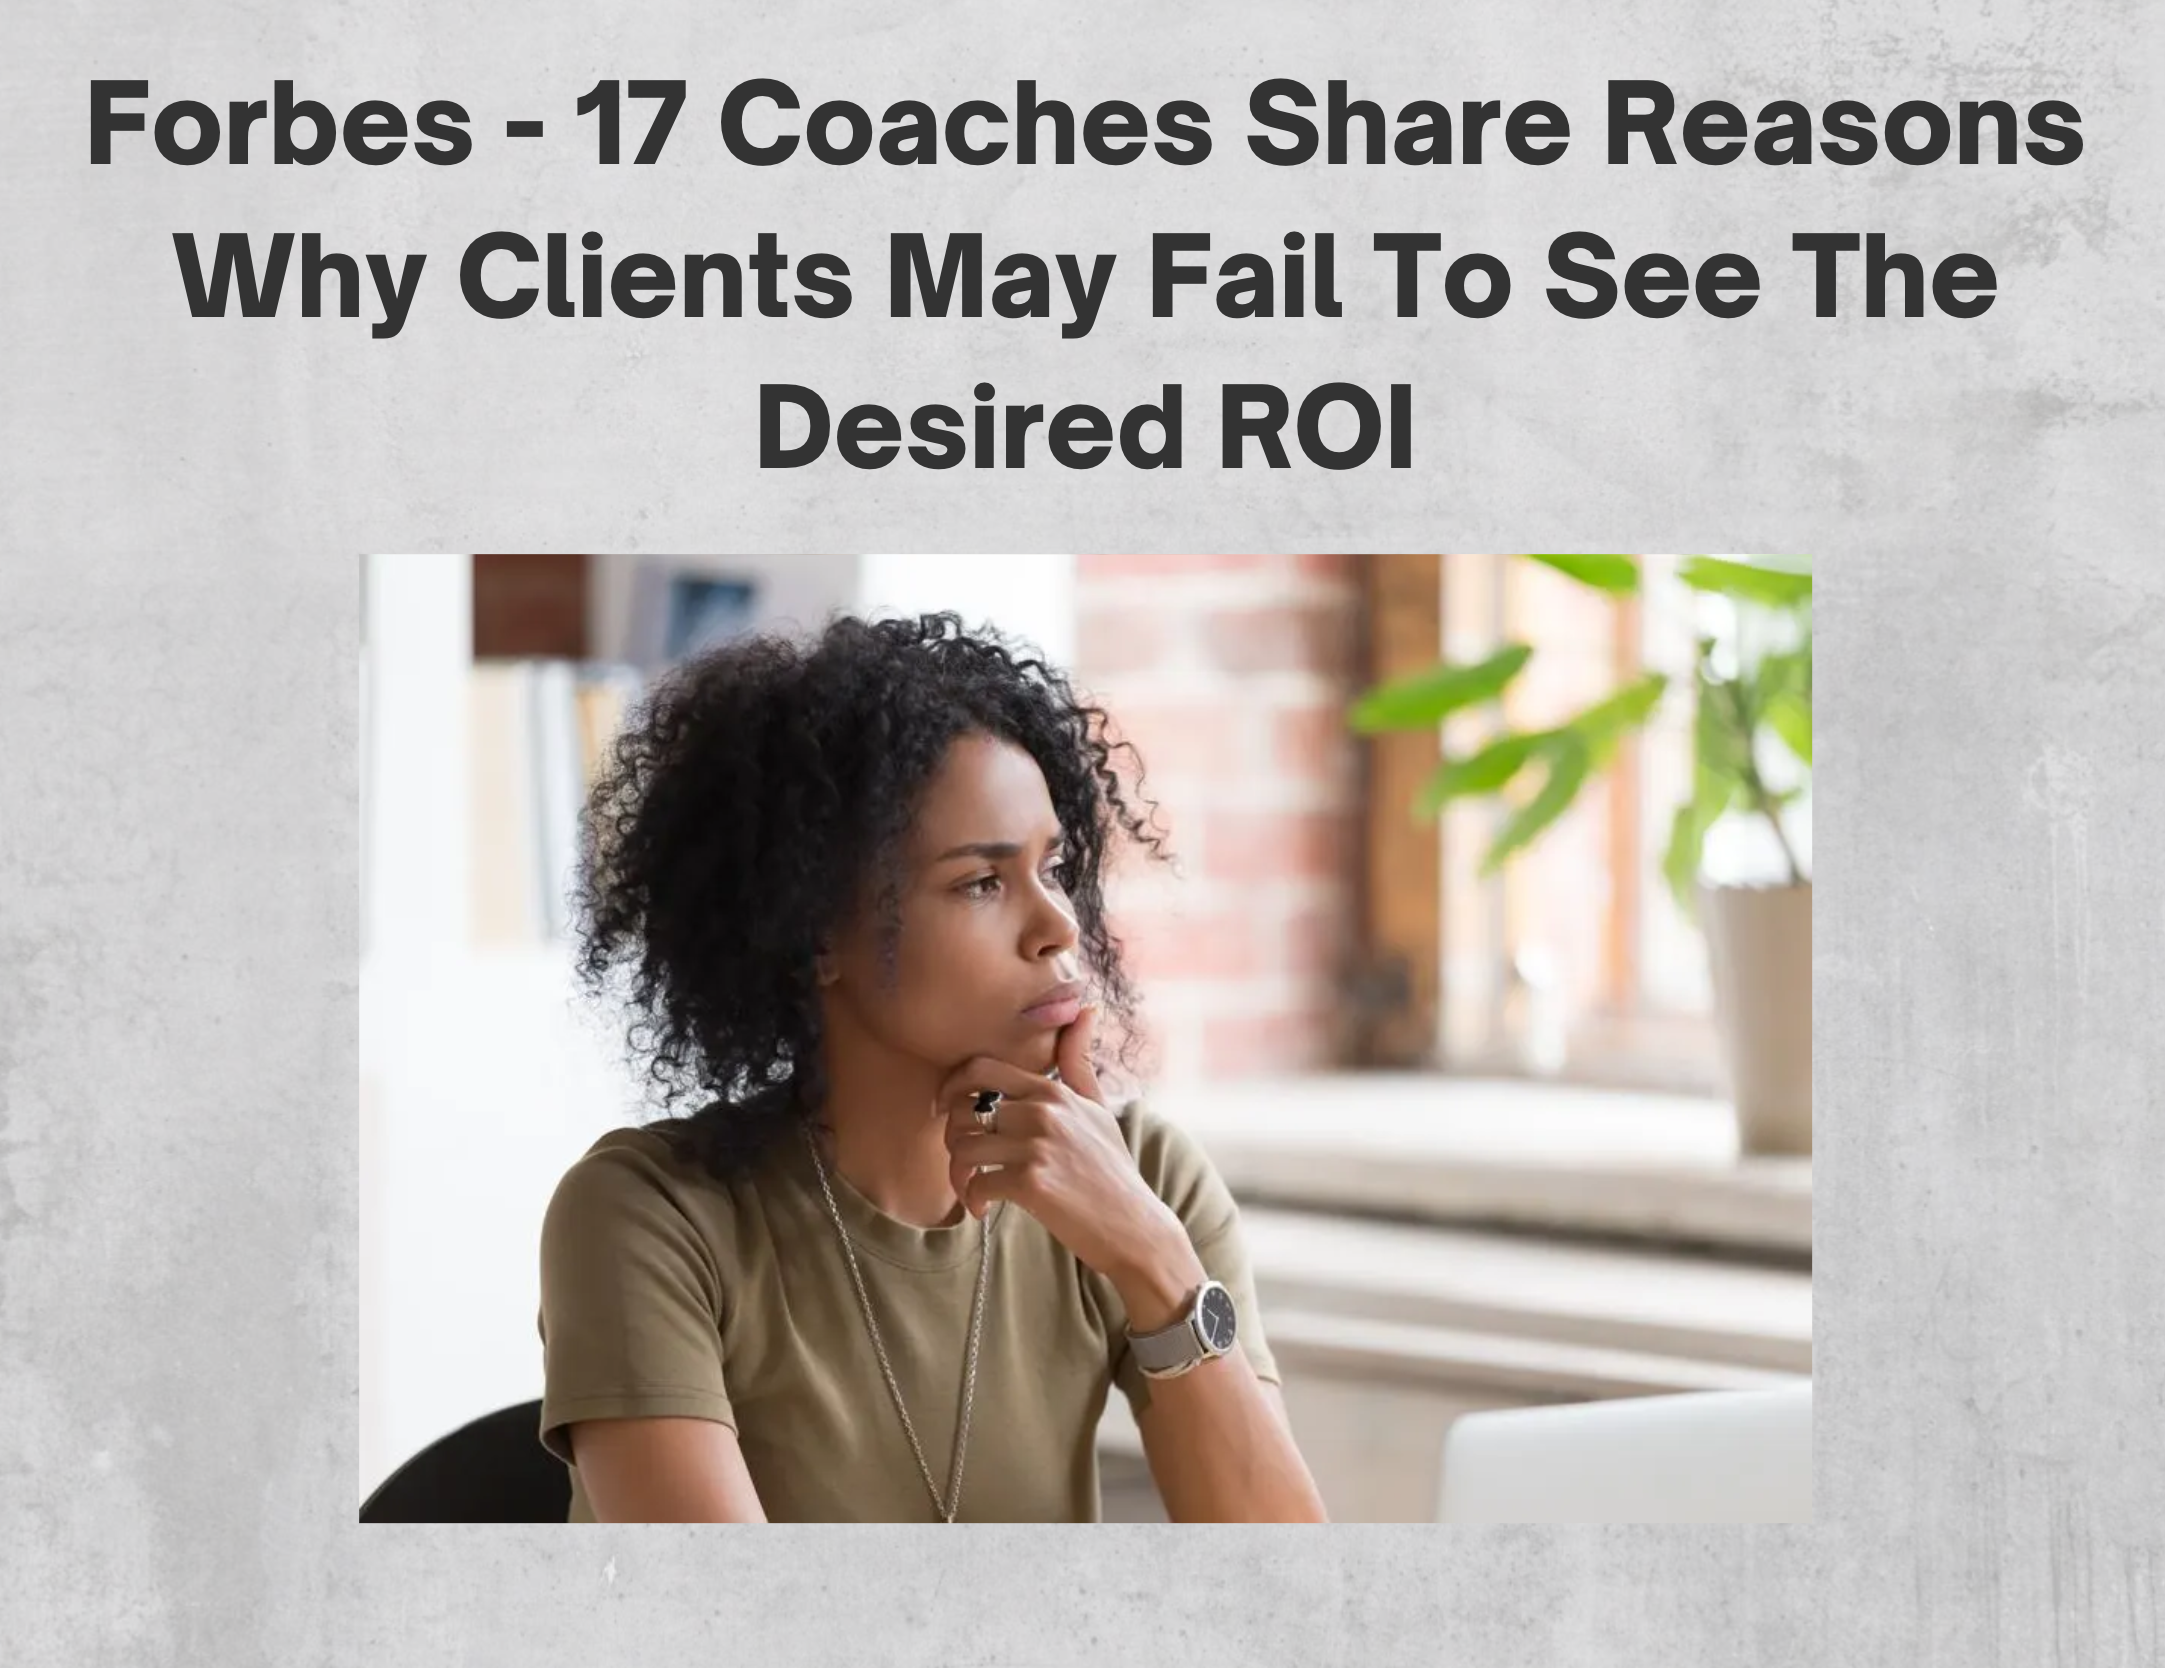 17 Coaches Share Reasons Why Clients May Fail To See The Desired ROI